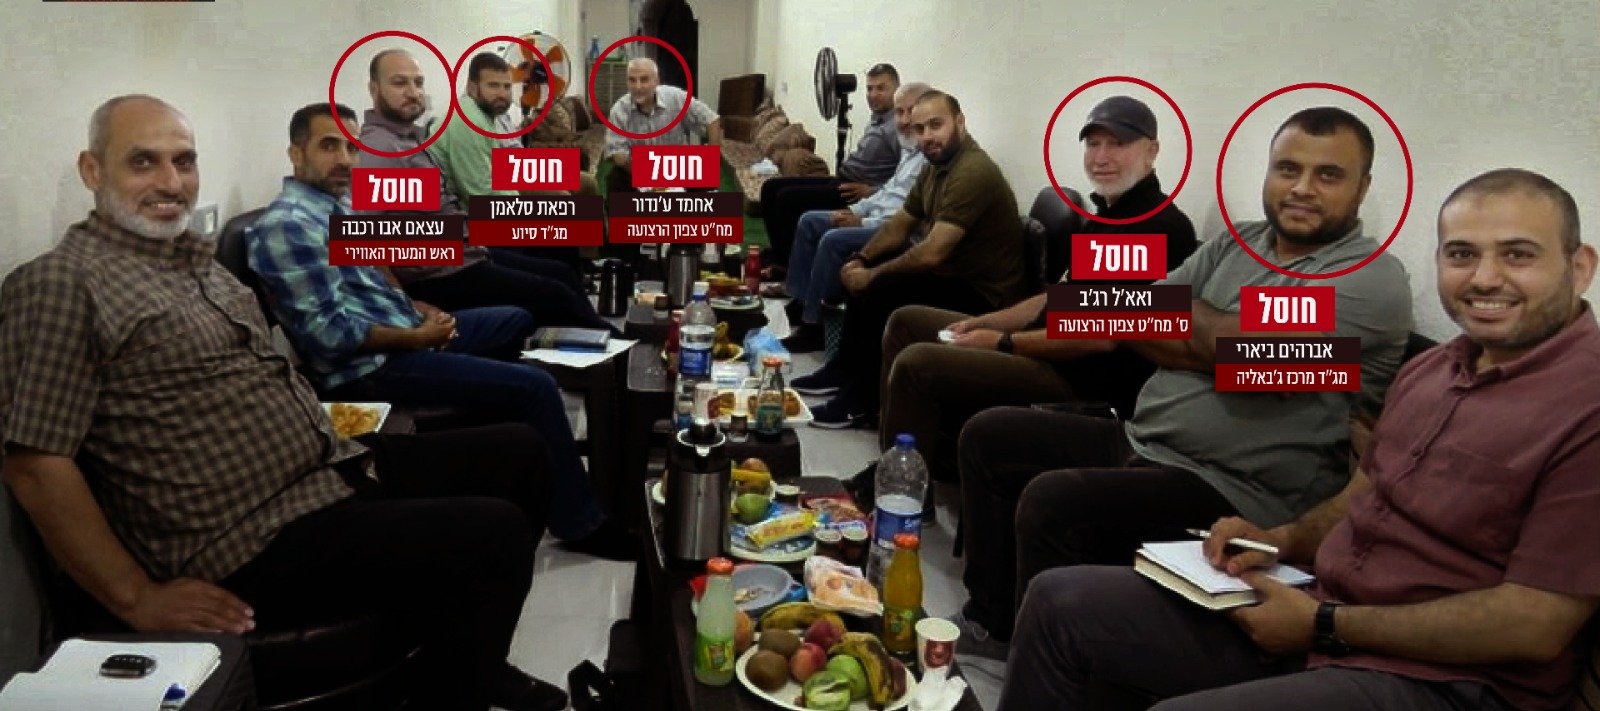 A handout image from the IDF shows what they claim are senior Hamas officials who were eliminated in tunnels in Gaza.